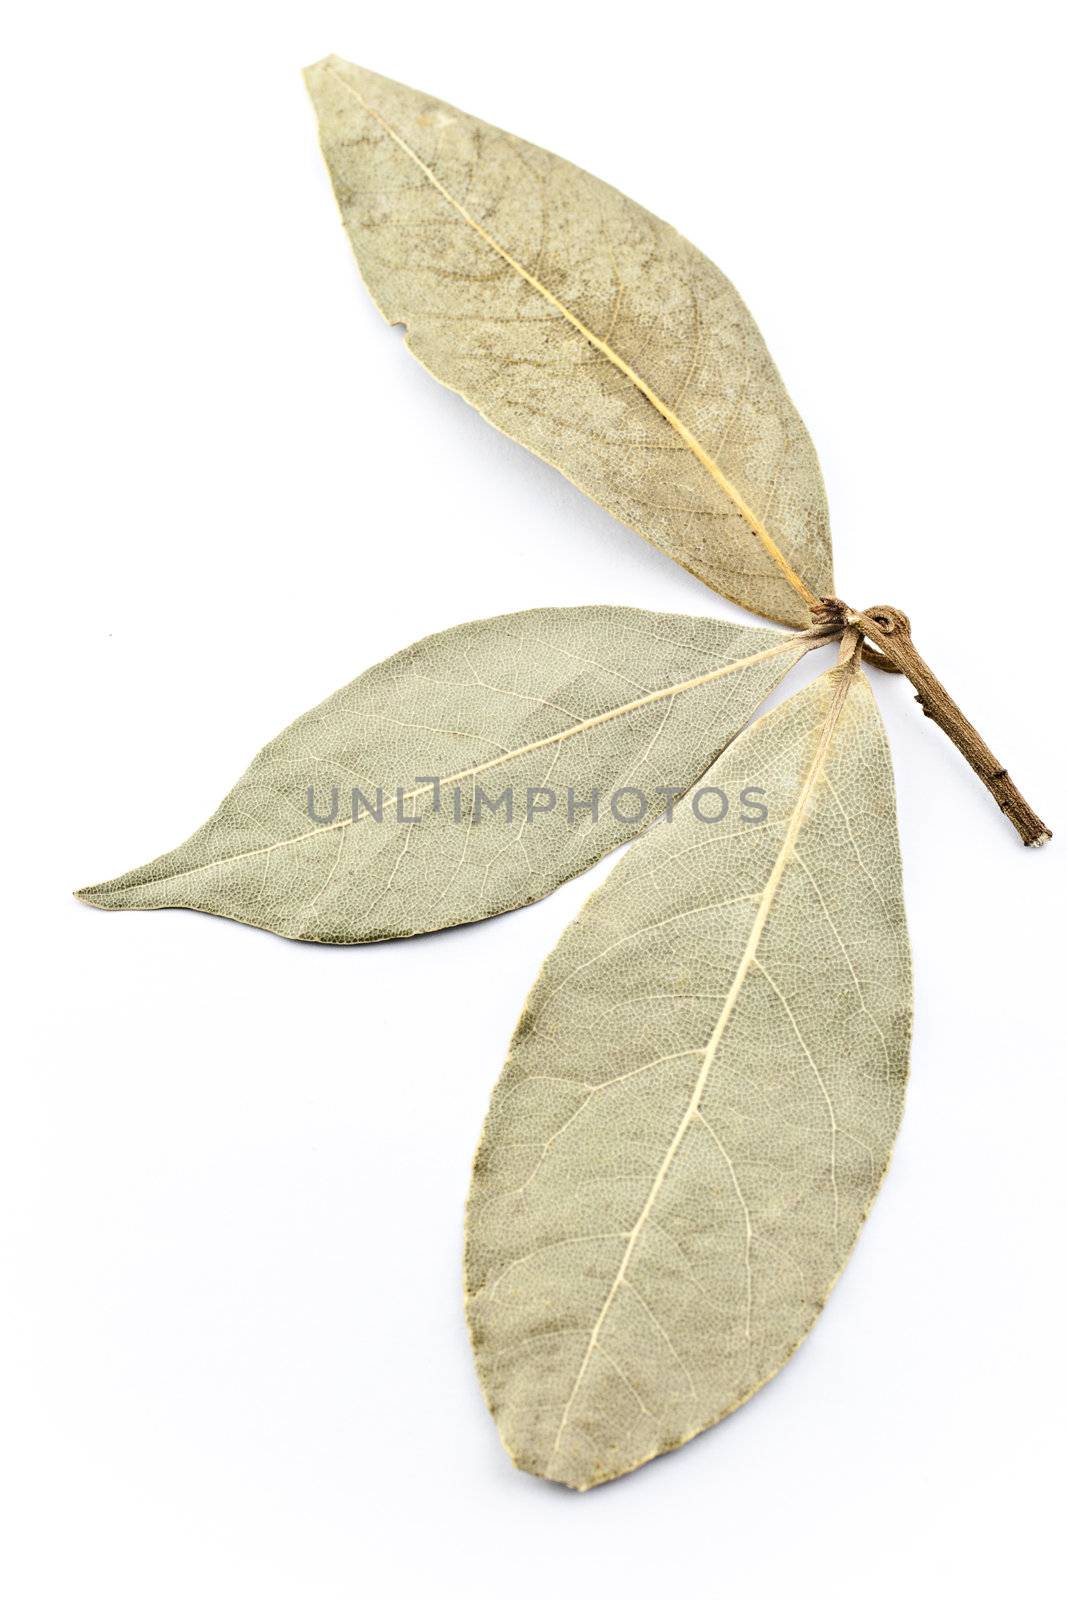 Three bay leaves on a white background.
